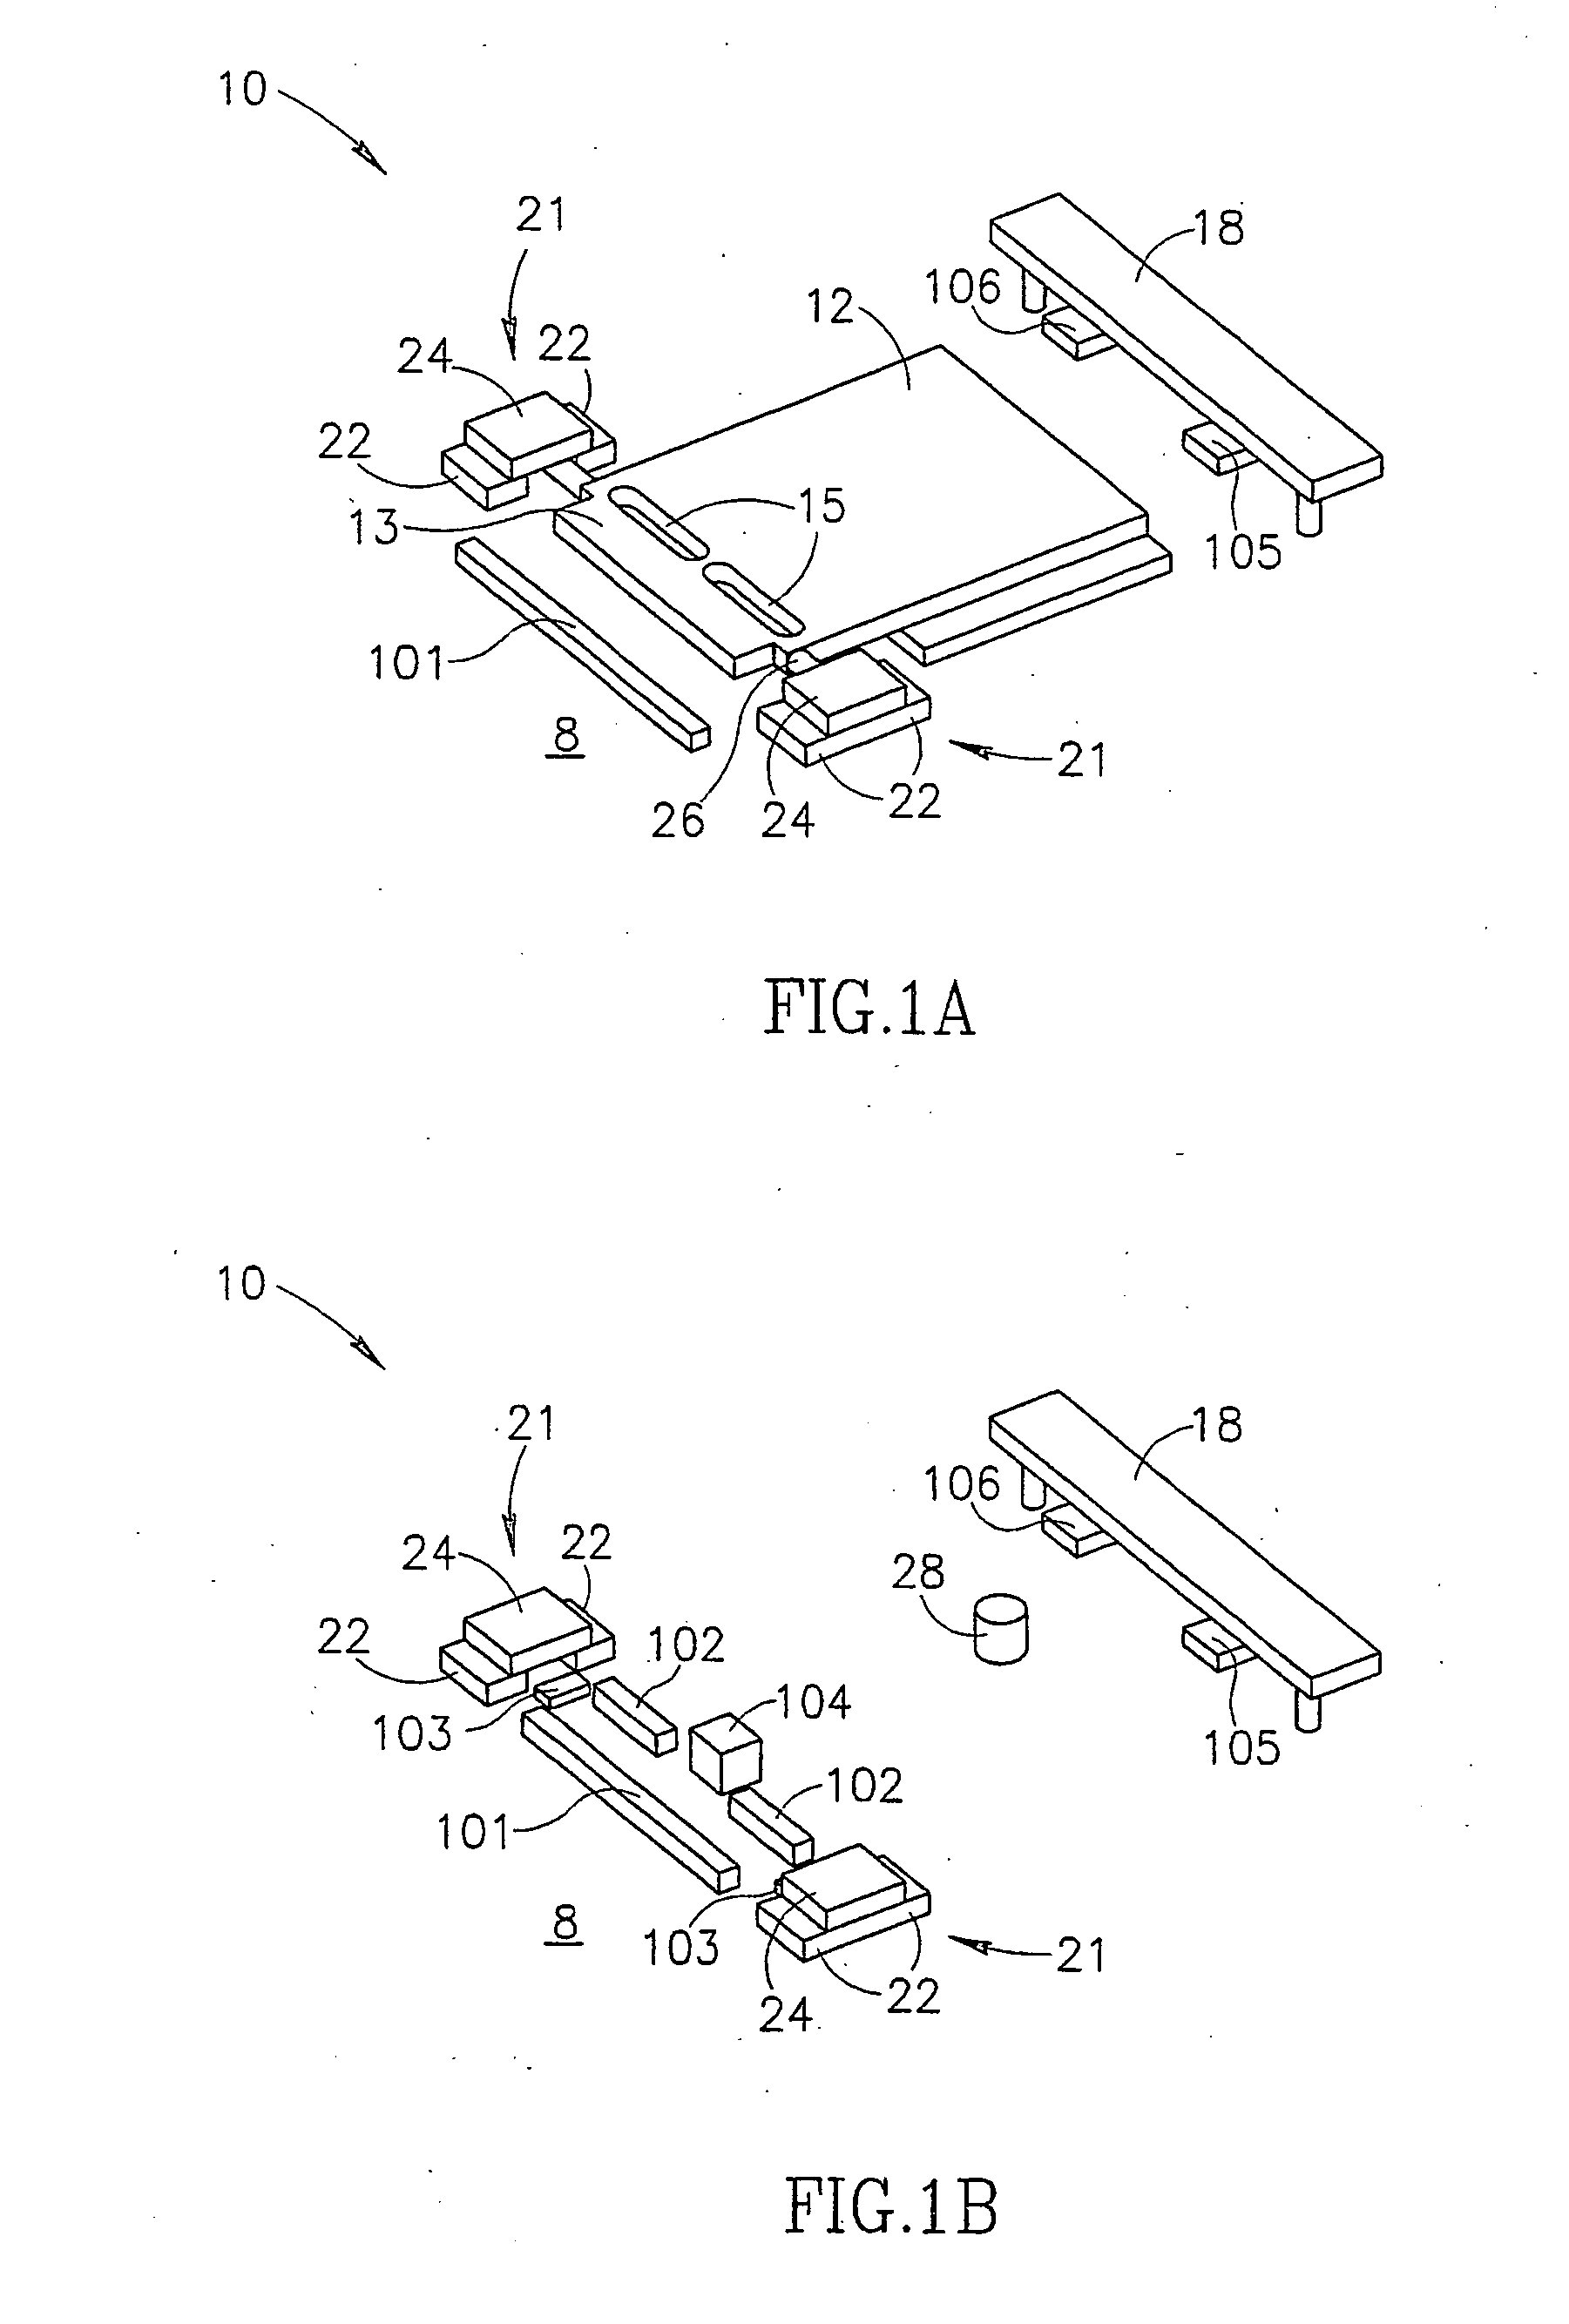 Display devices